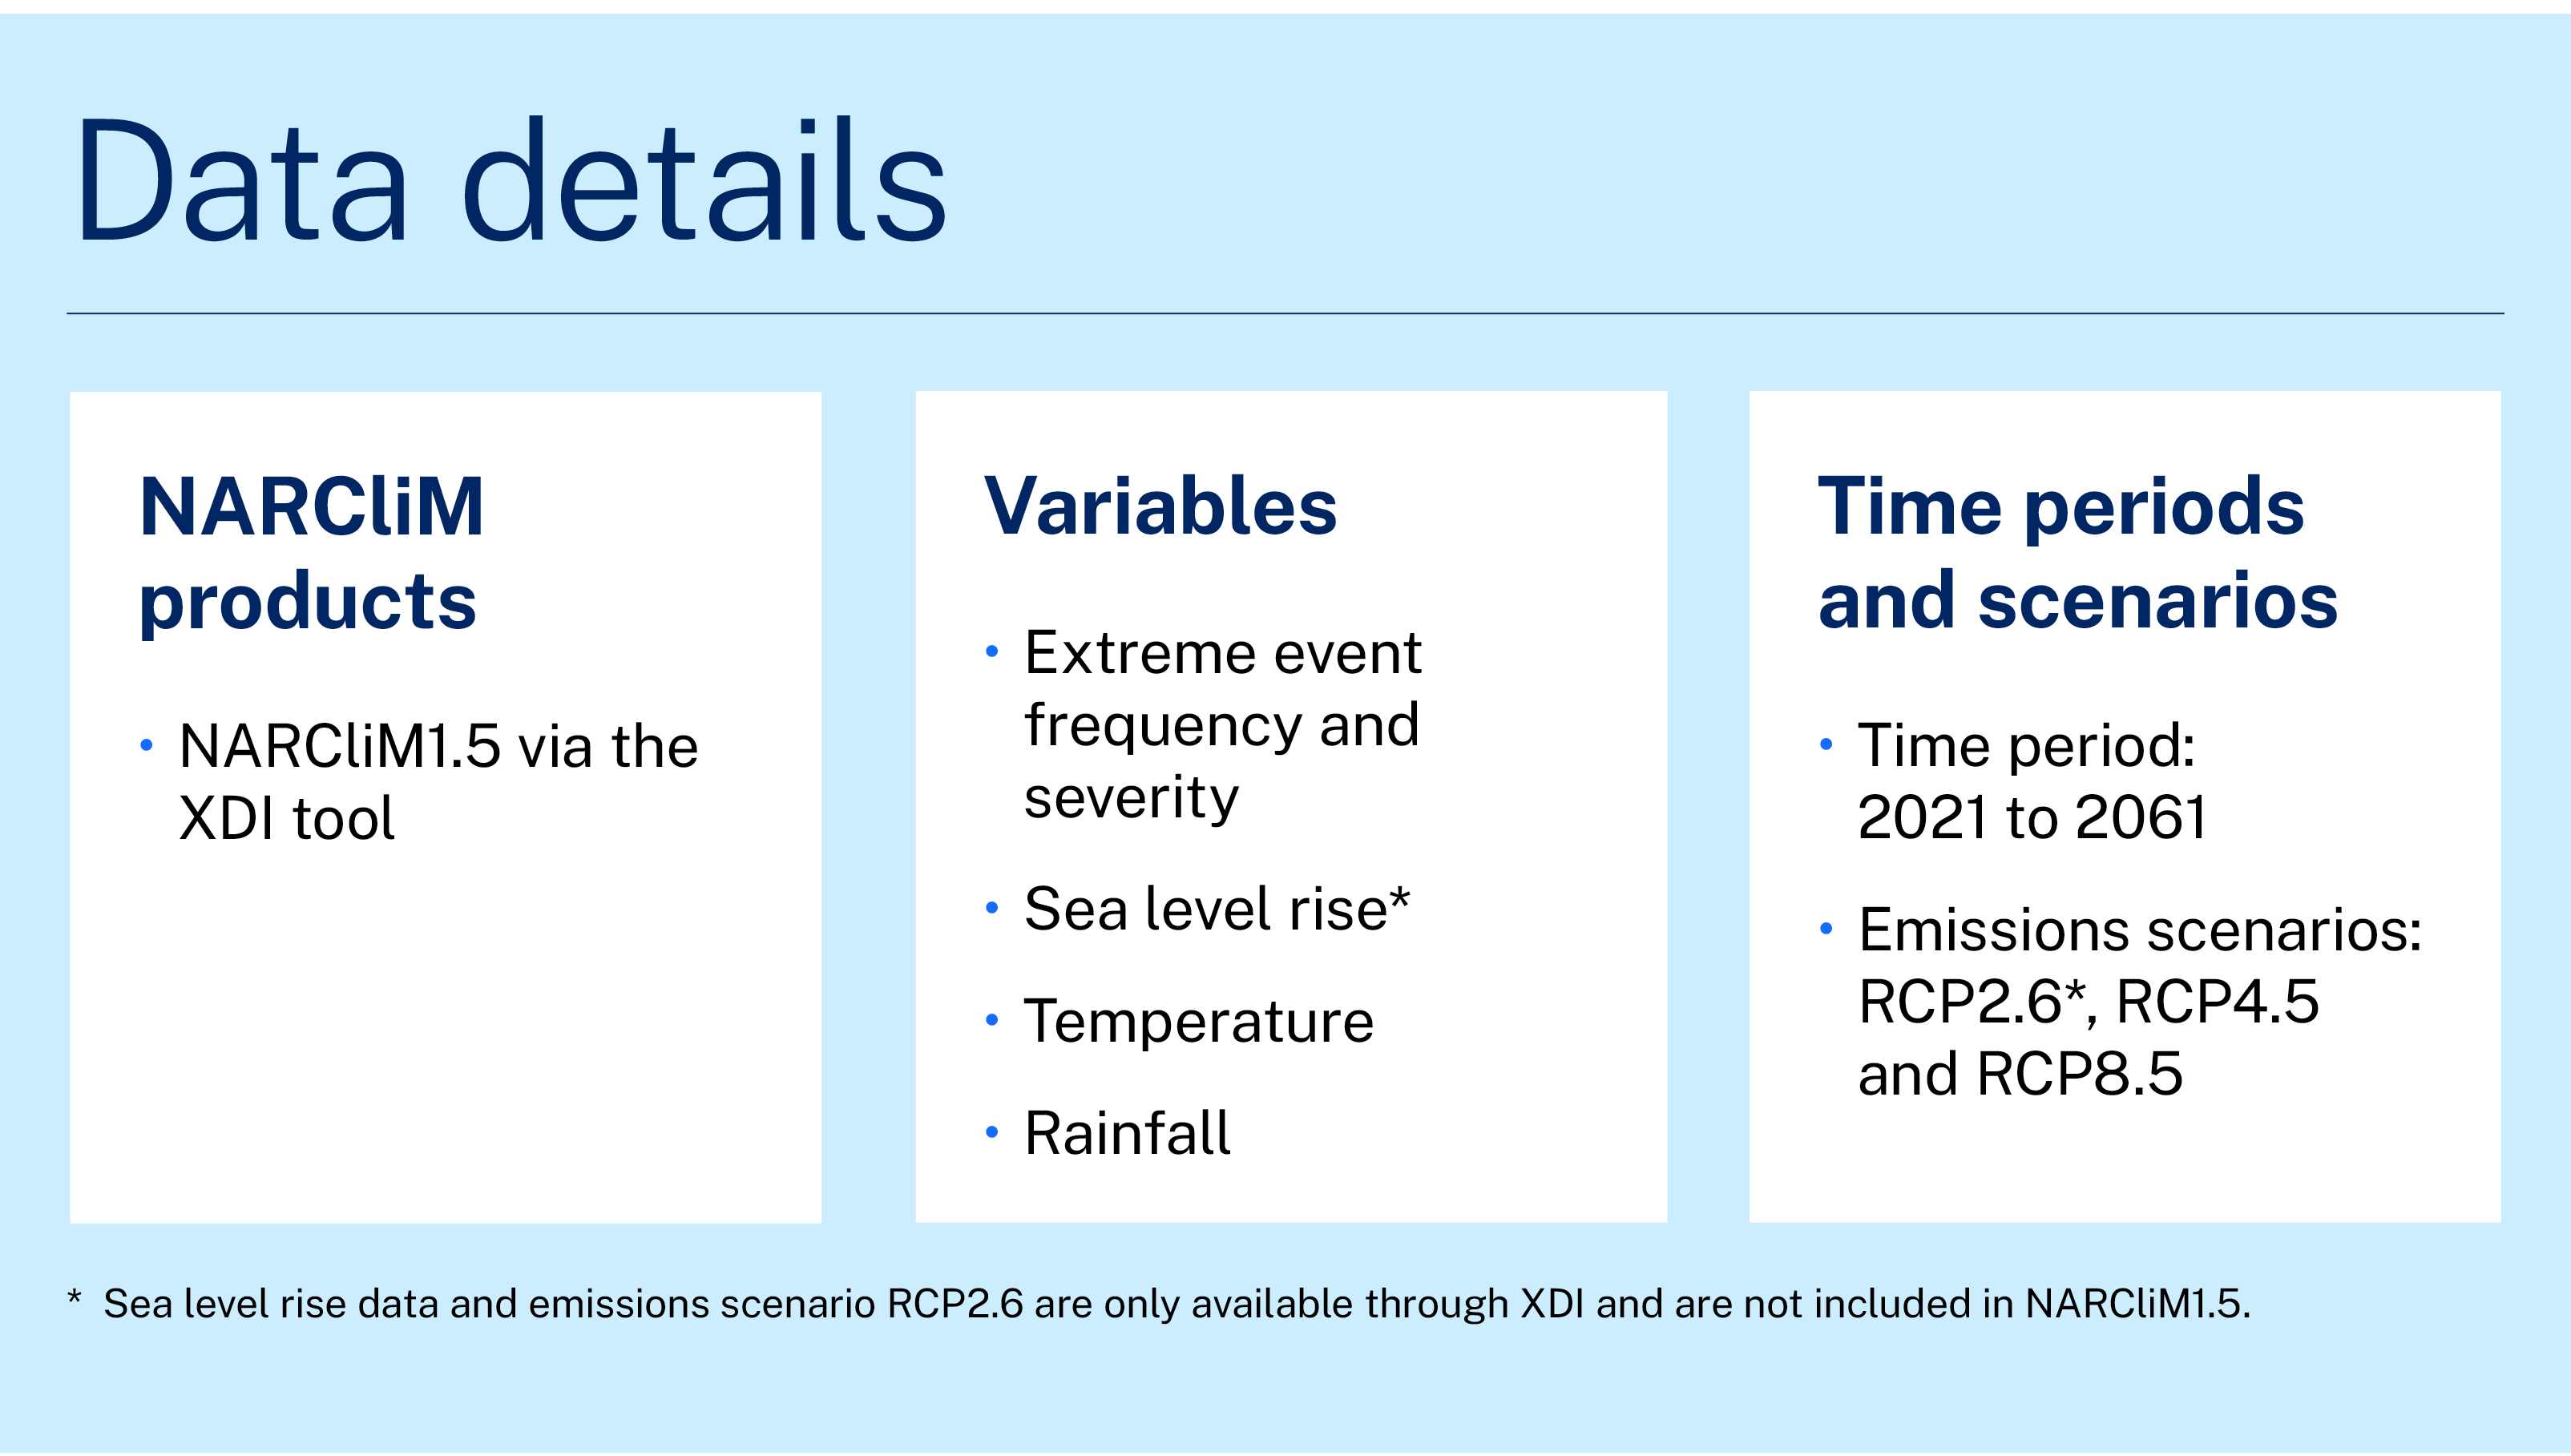 Information graphic. Overview of the data details of the project featured in the case study. One. Narclim products. Narclim 1.5 via the XDI tool. Two. Variables. Extreme event frequency and severity, sea level rise (sea level rise data and emissions scenario RCP2.6 are only available through XDI and are not included in narclim 1.5), temperature and rainfall. Time periods and scenarios. Time period: 2021 to 2061. Emissions scenarios: RCP2.6, RCP4.5 and RCP8.5. 